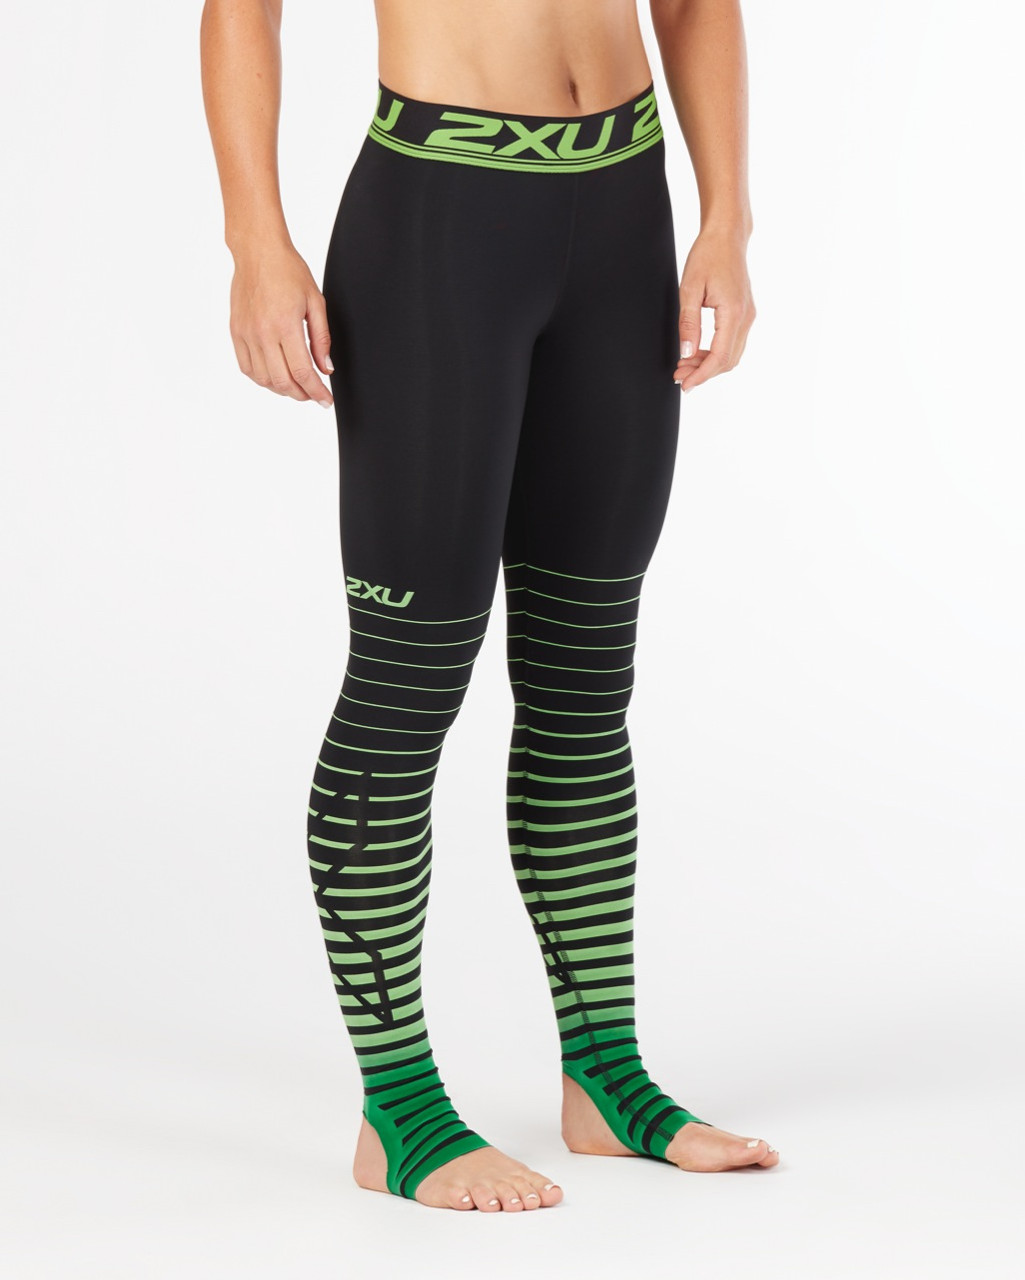 Women's Recovery Compression Tights – 2XU US